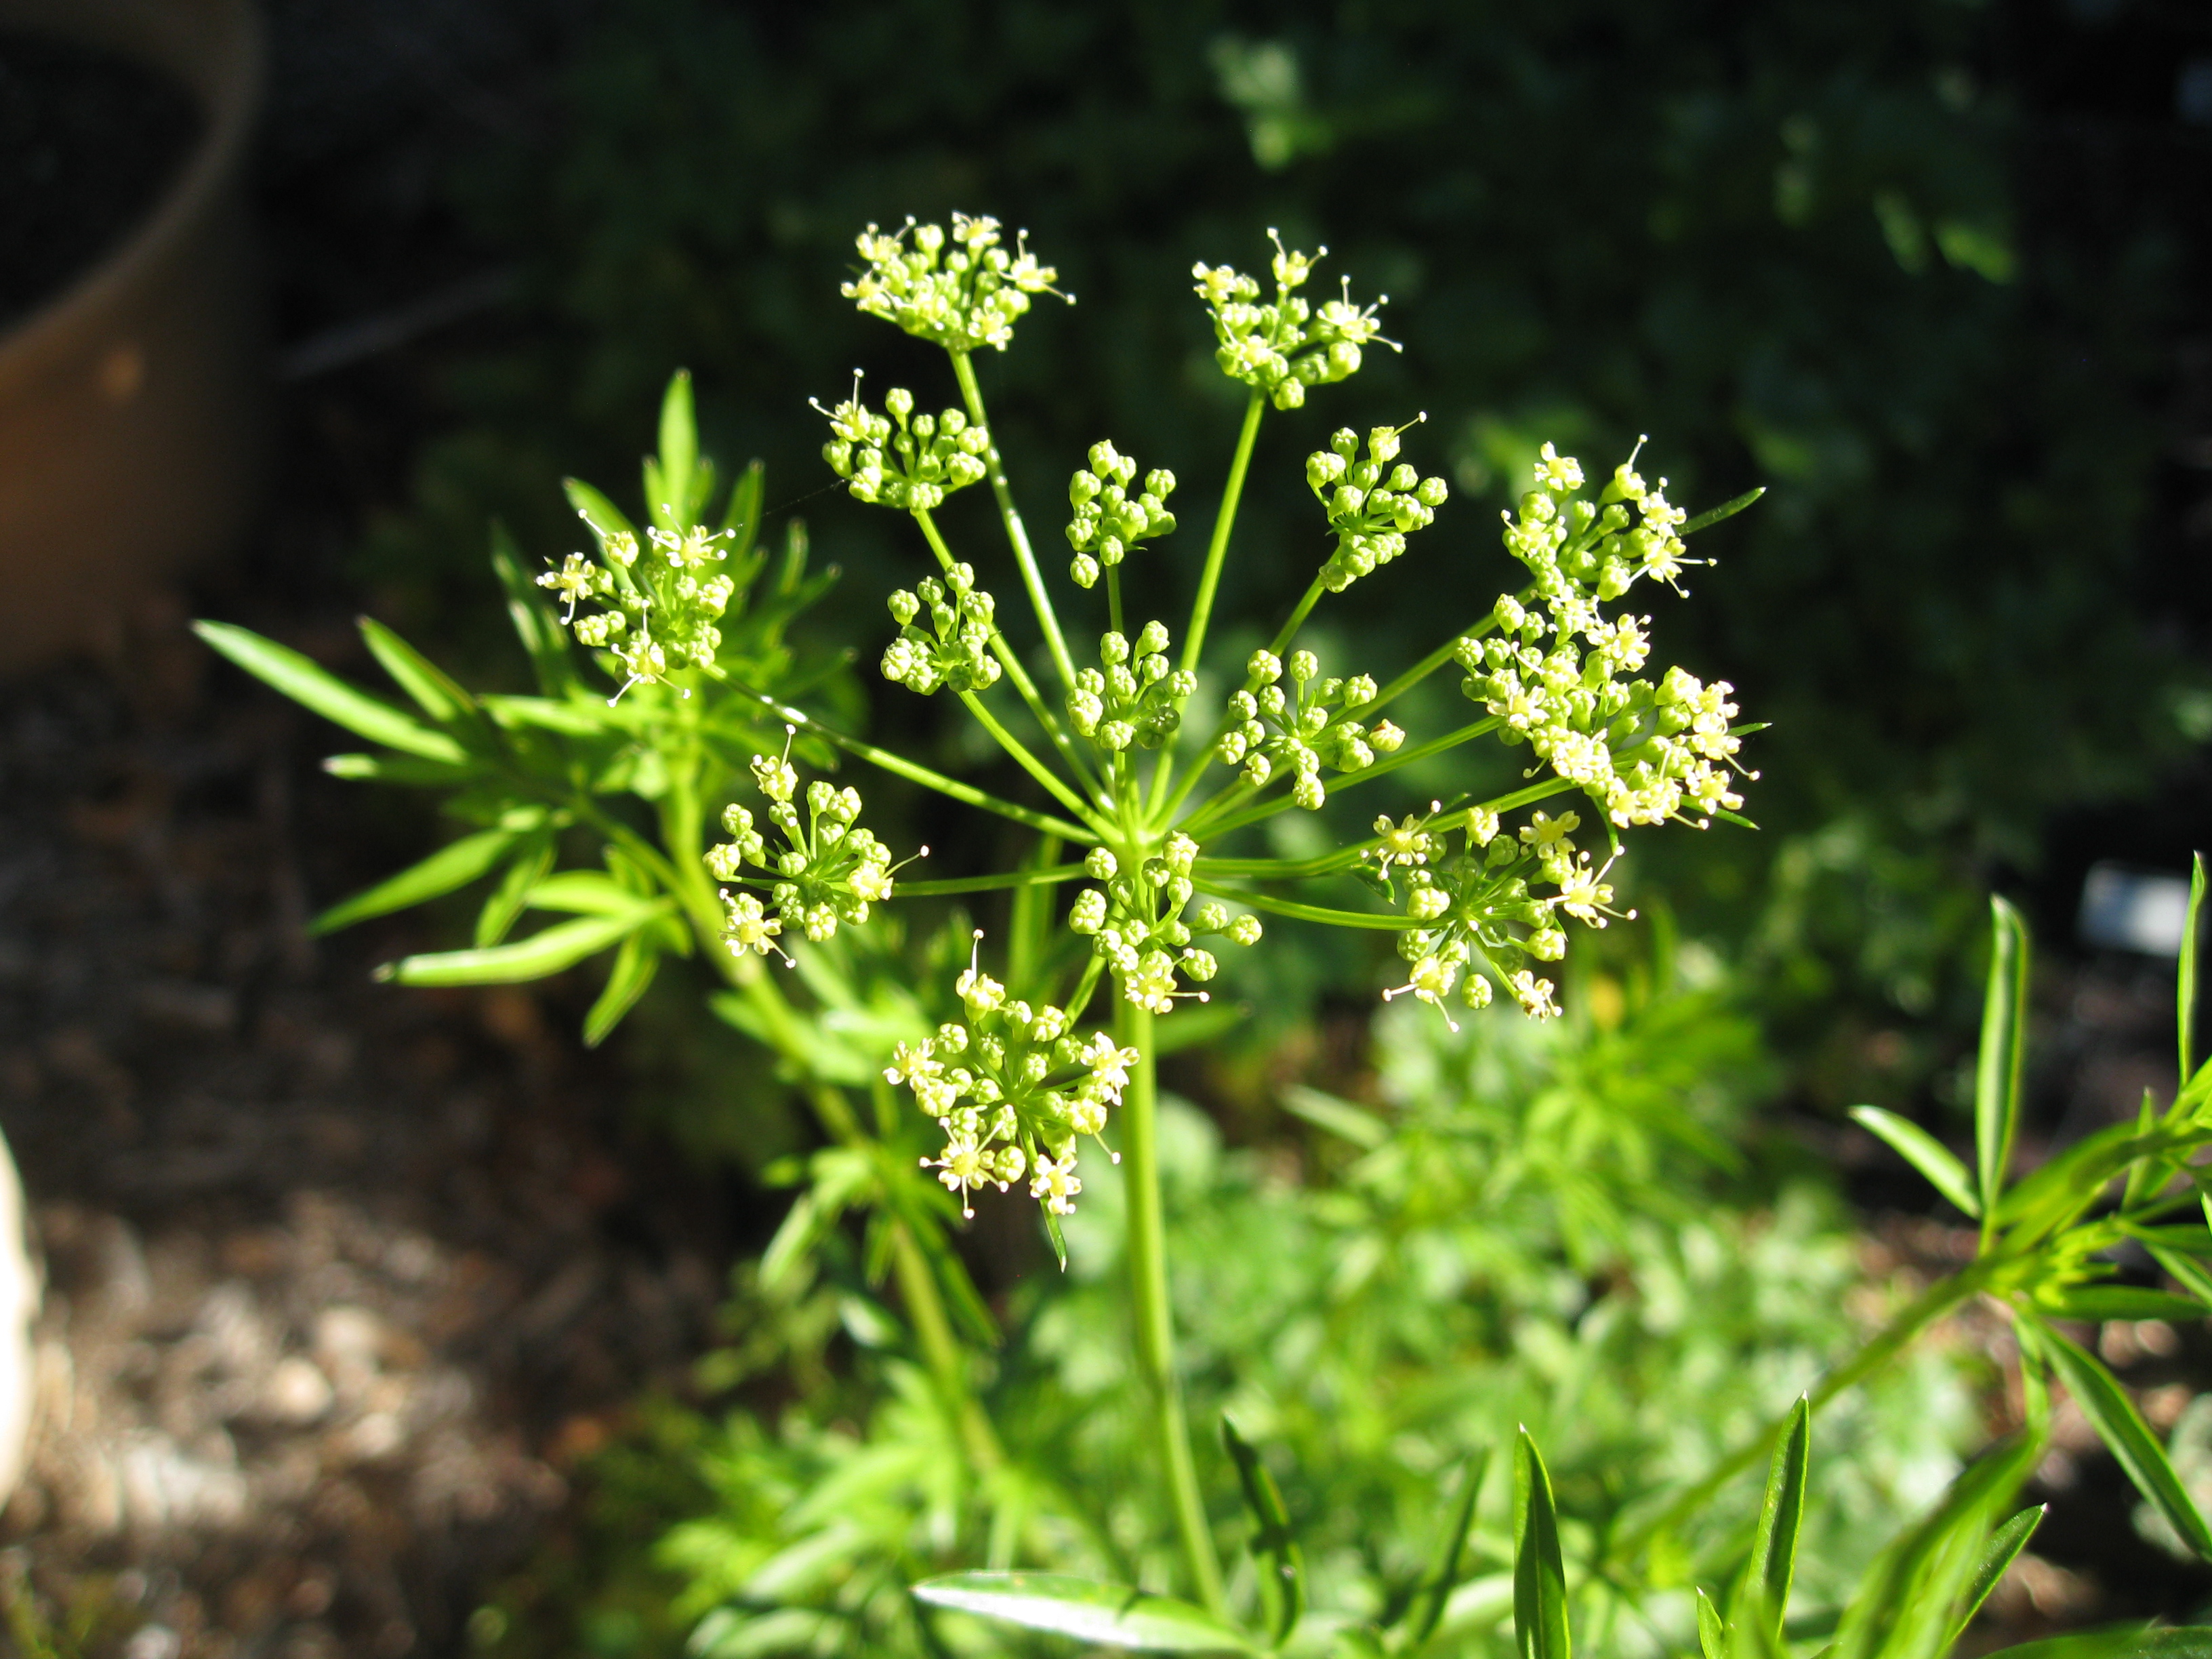 Parsley from summer bolts to seed.